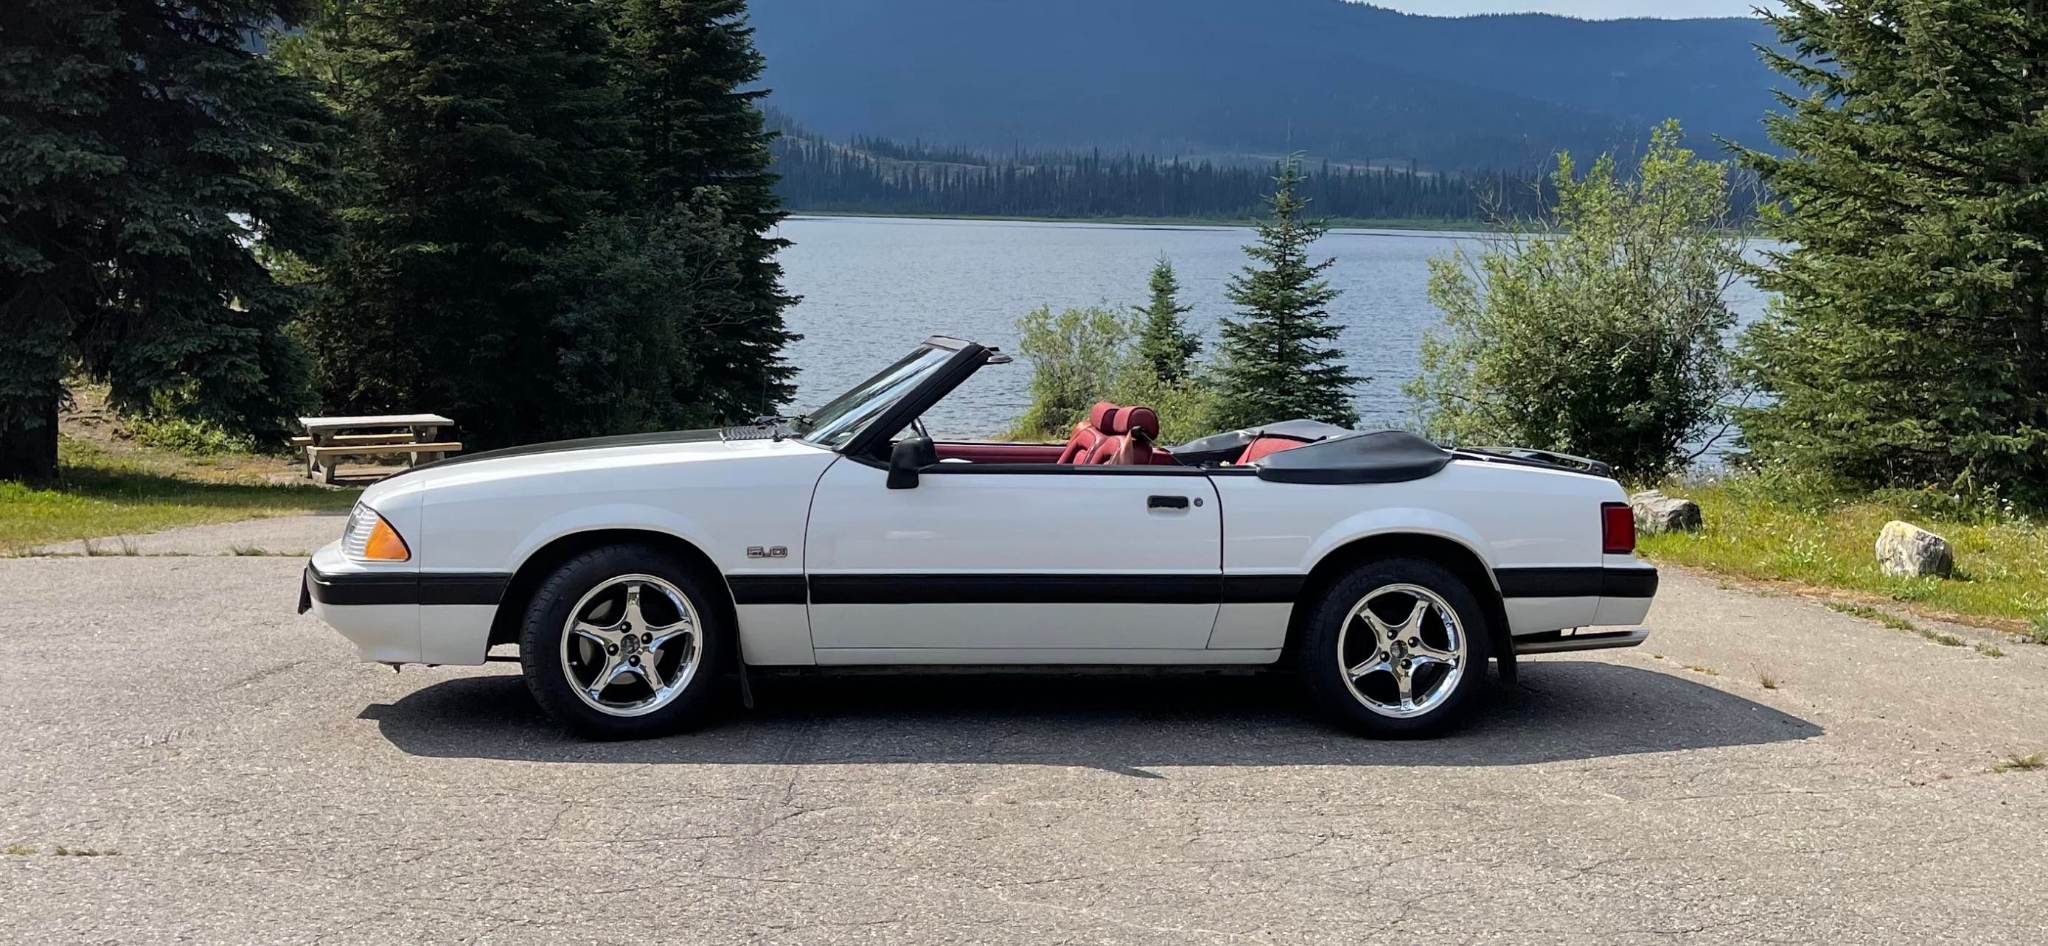 1991 Mustang, owned by Linda and Rick Stevenson